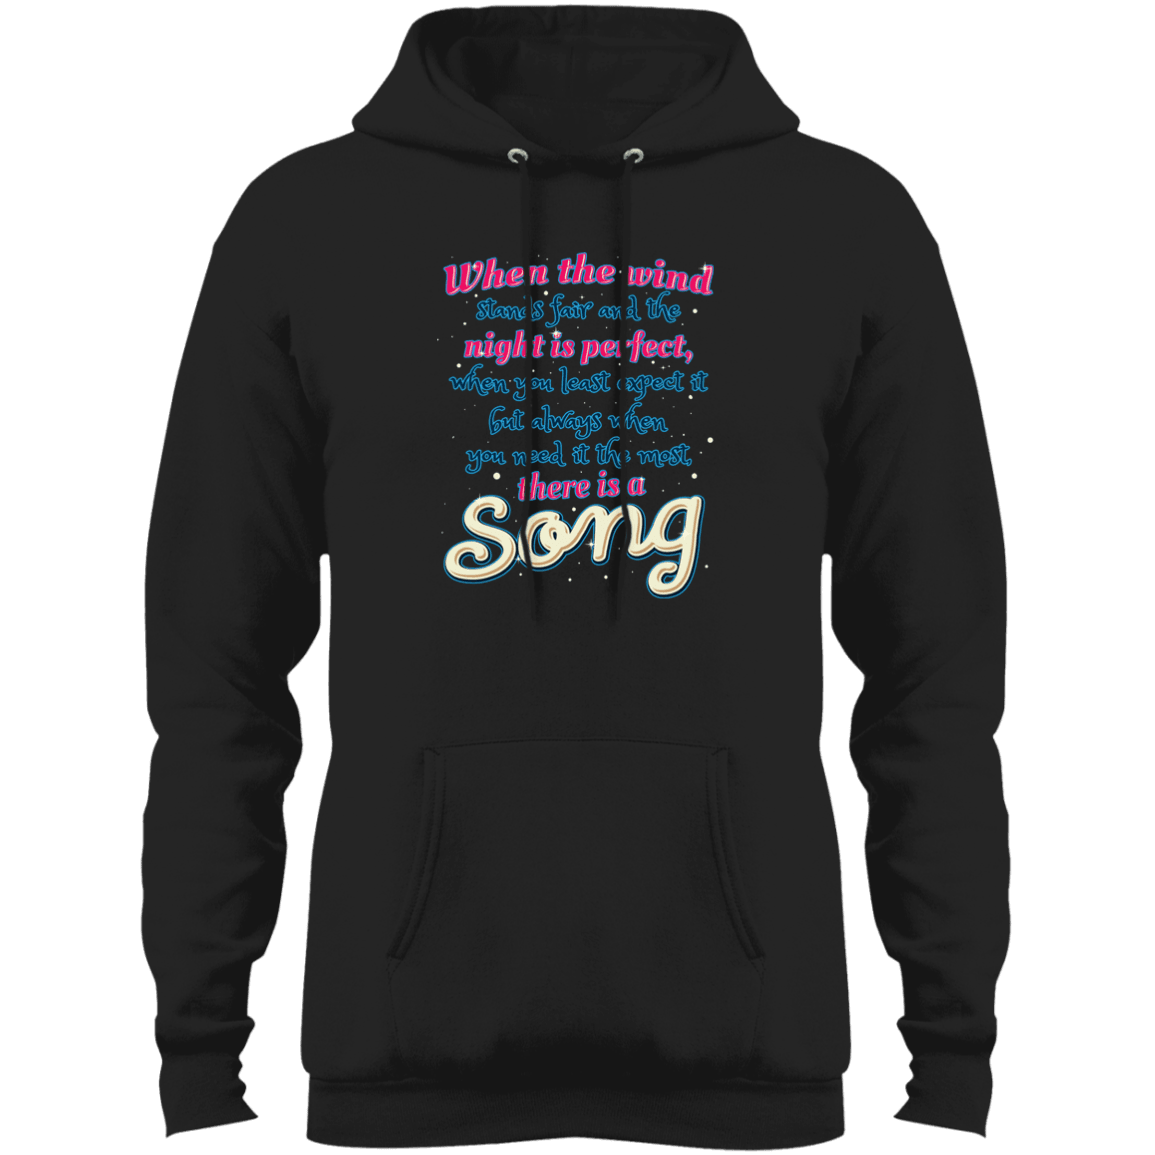 Designs by MyUtopia Shout Out:When you Need it the Most There Is A Song Core Fleece Pullover Hoodie - Black,S / Jet Black,Sweatshirts